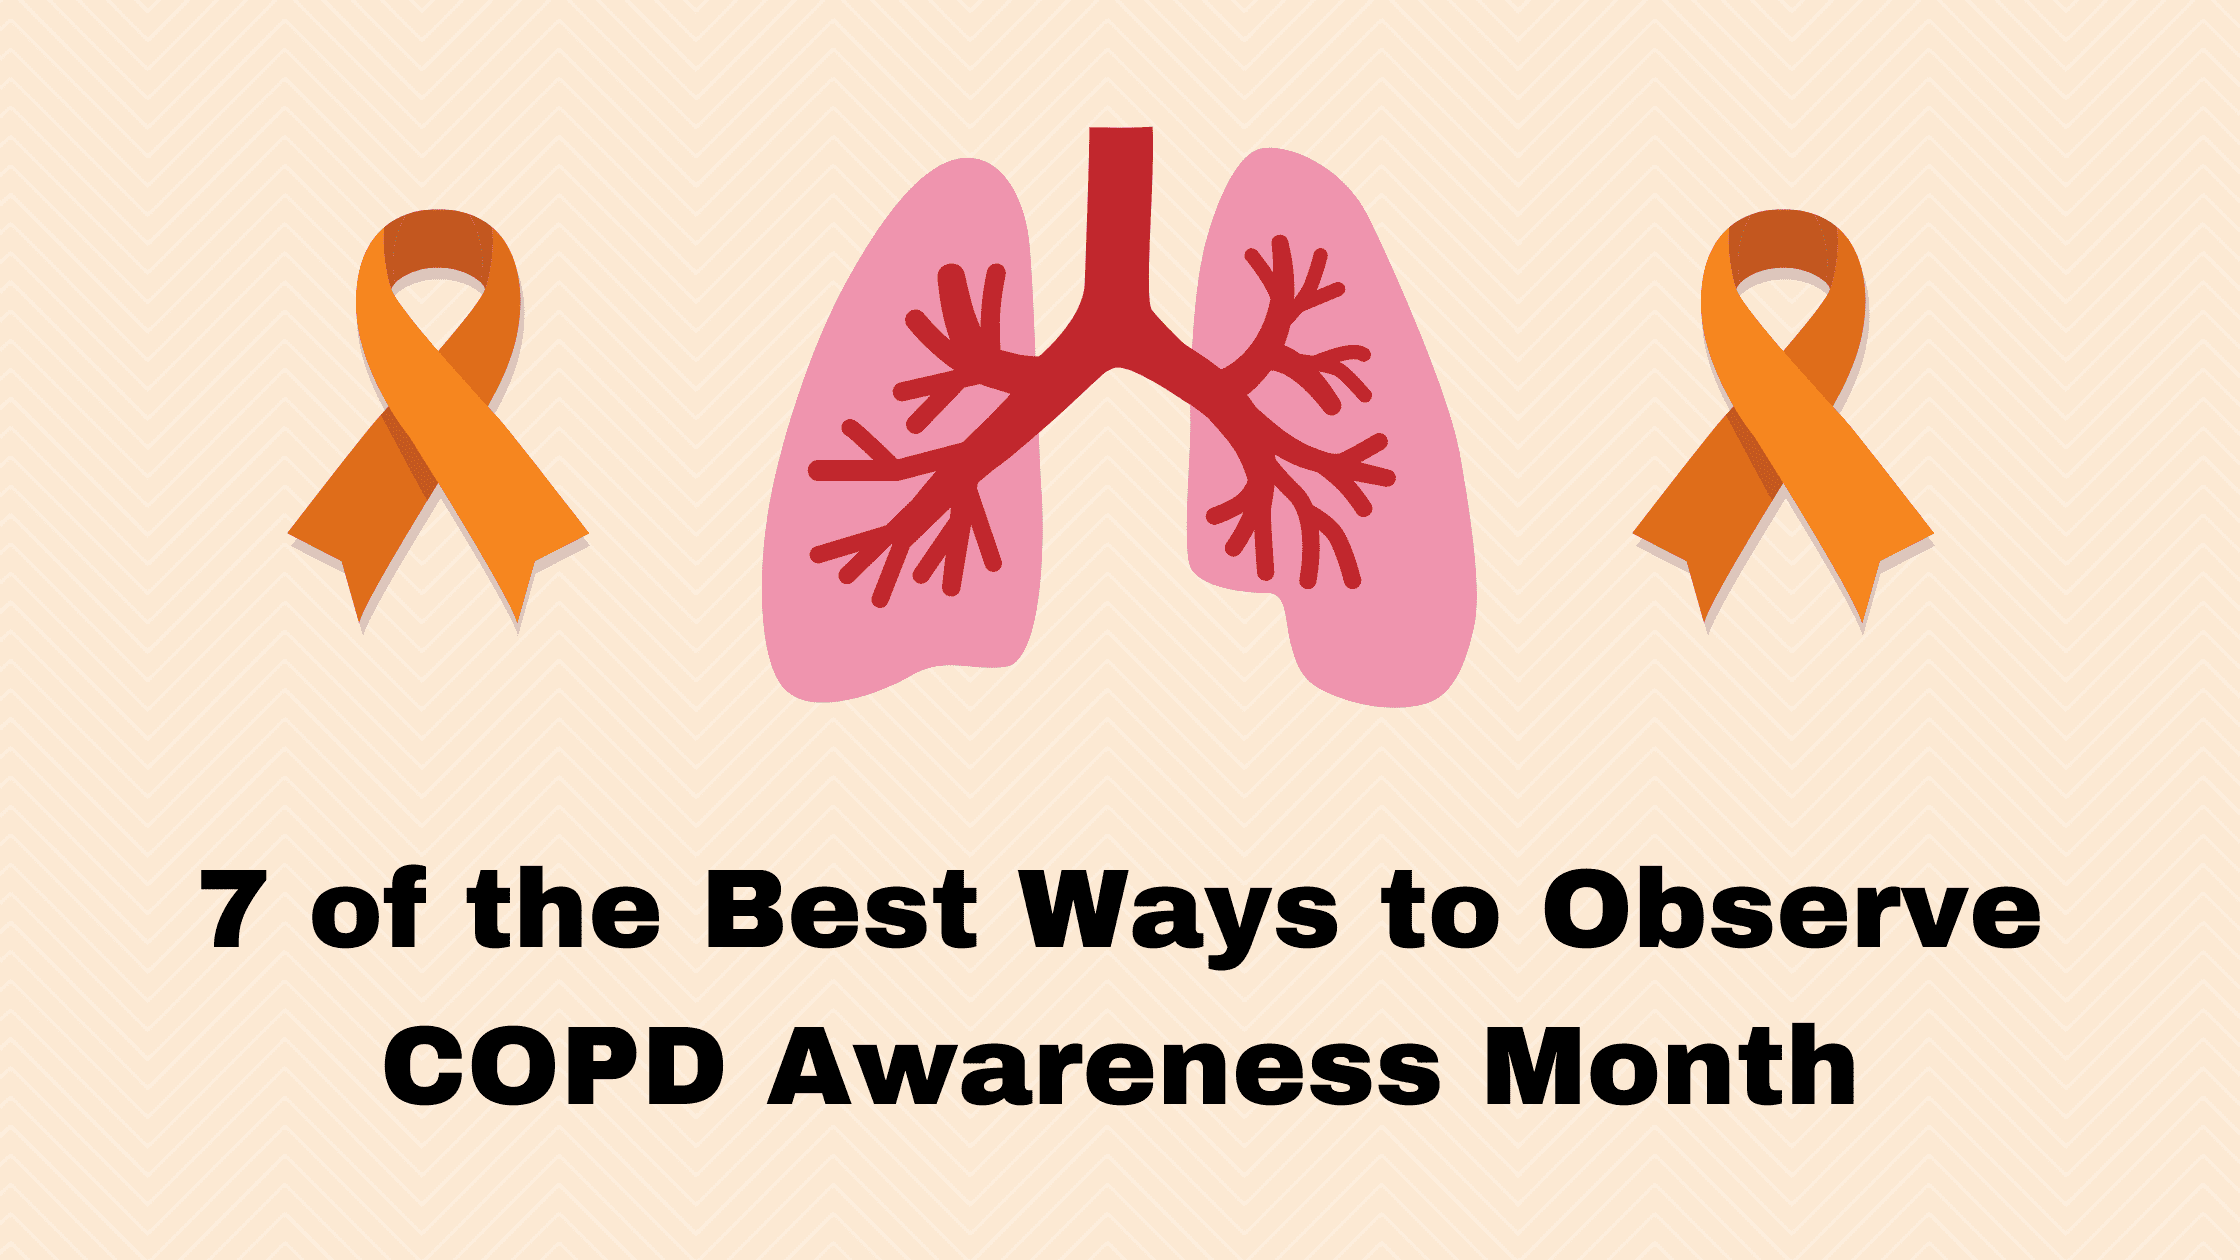 7 of the Best Ways to Observe COPD Awareness Month